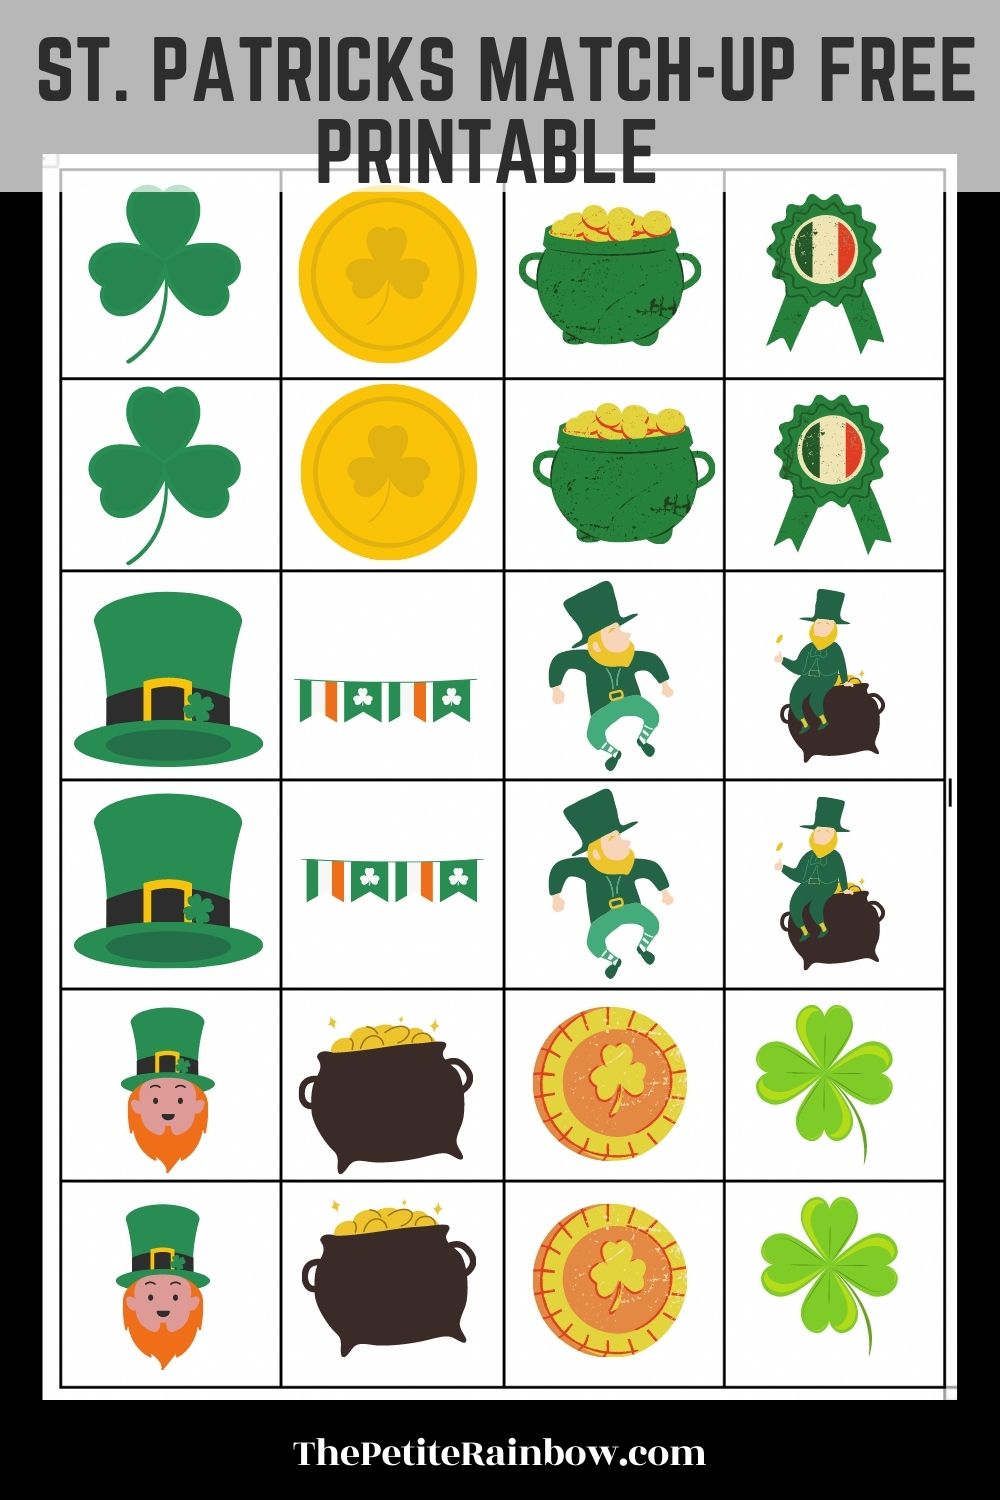 st-patrick-s-match-up-party-game-the-petite-rainbow